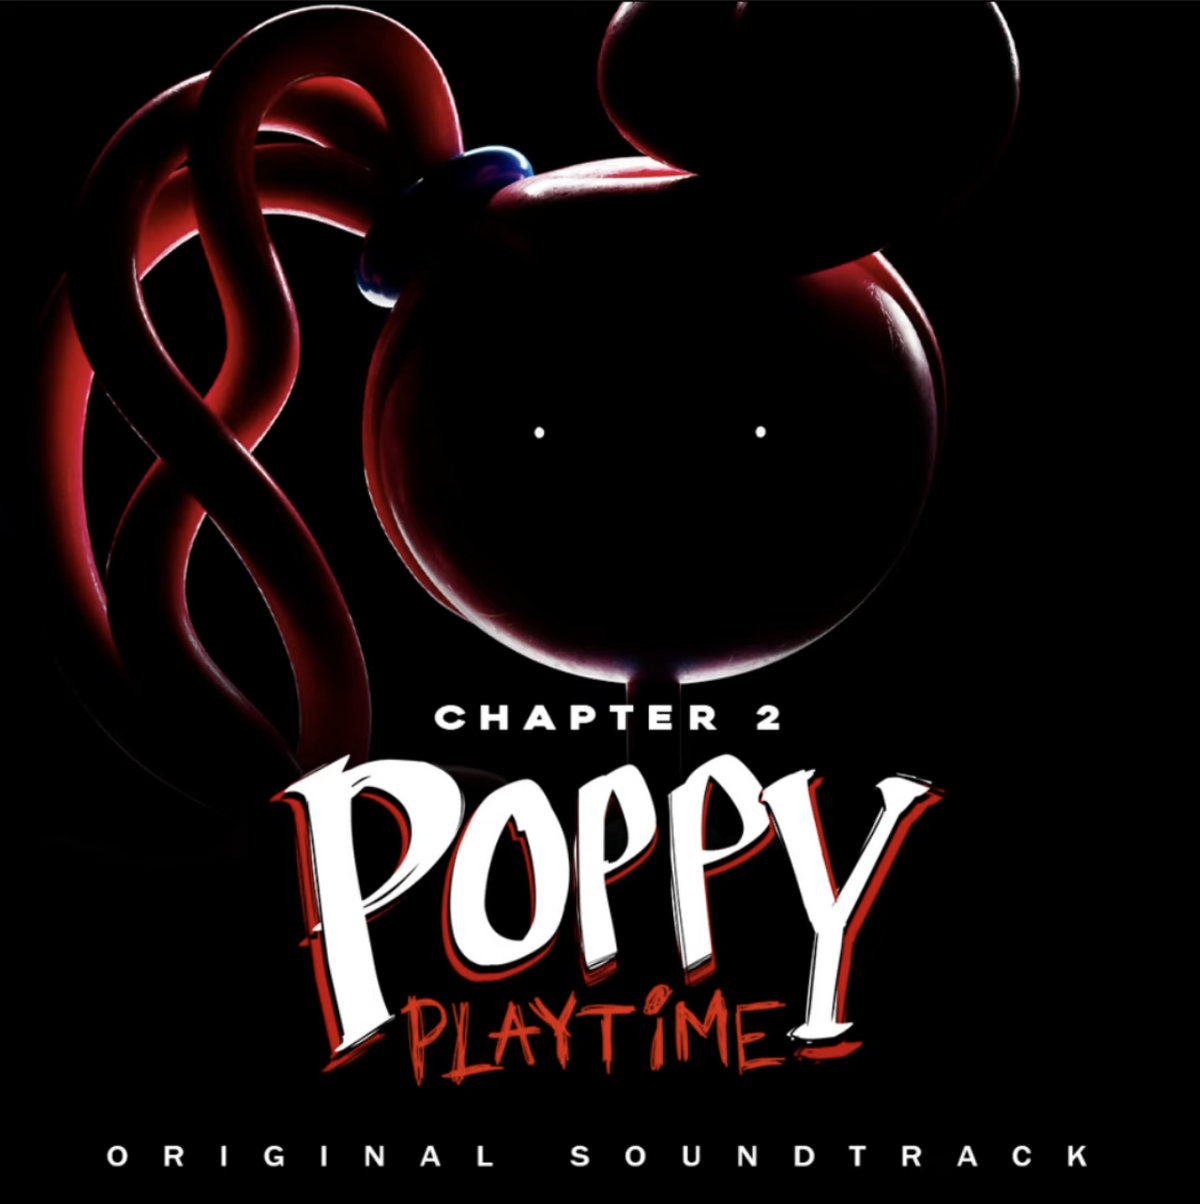 Game Poppy Playtime Chapter 2 online. Play for free